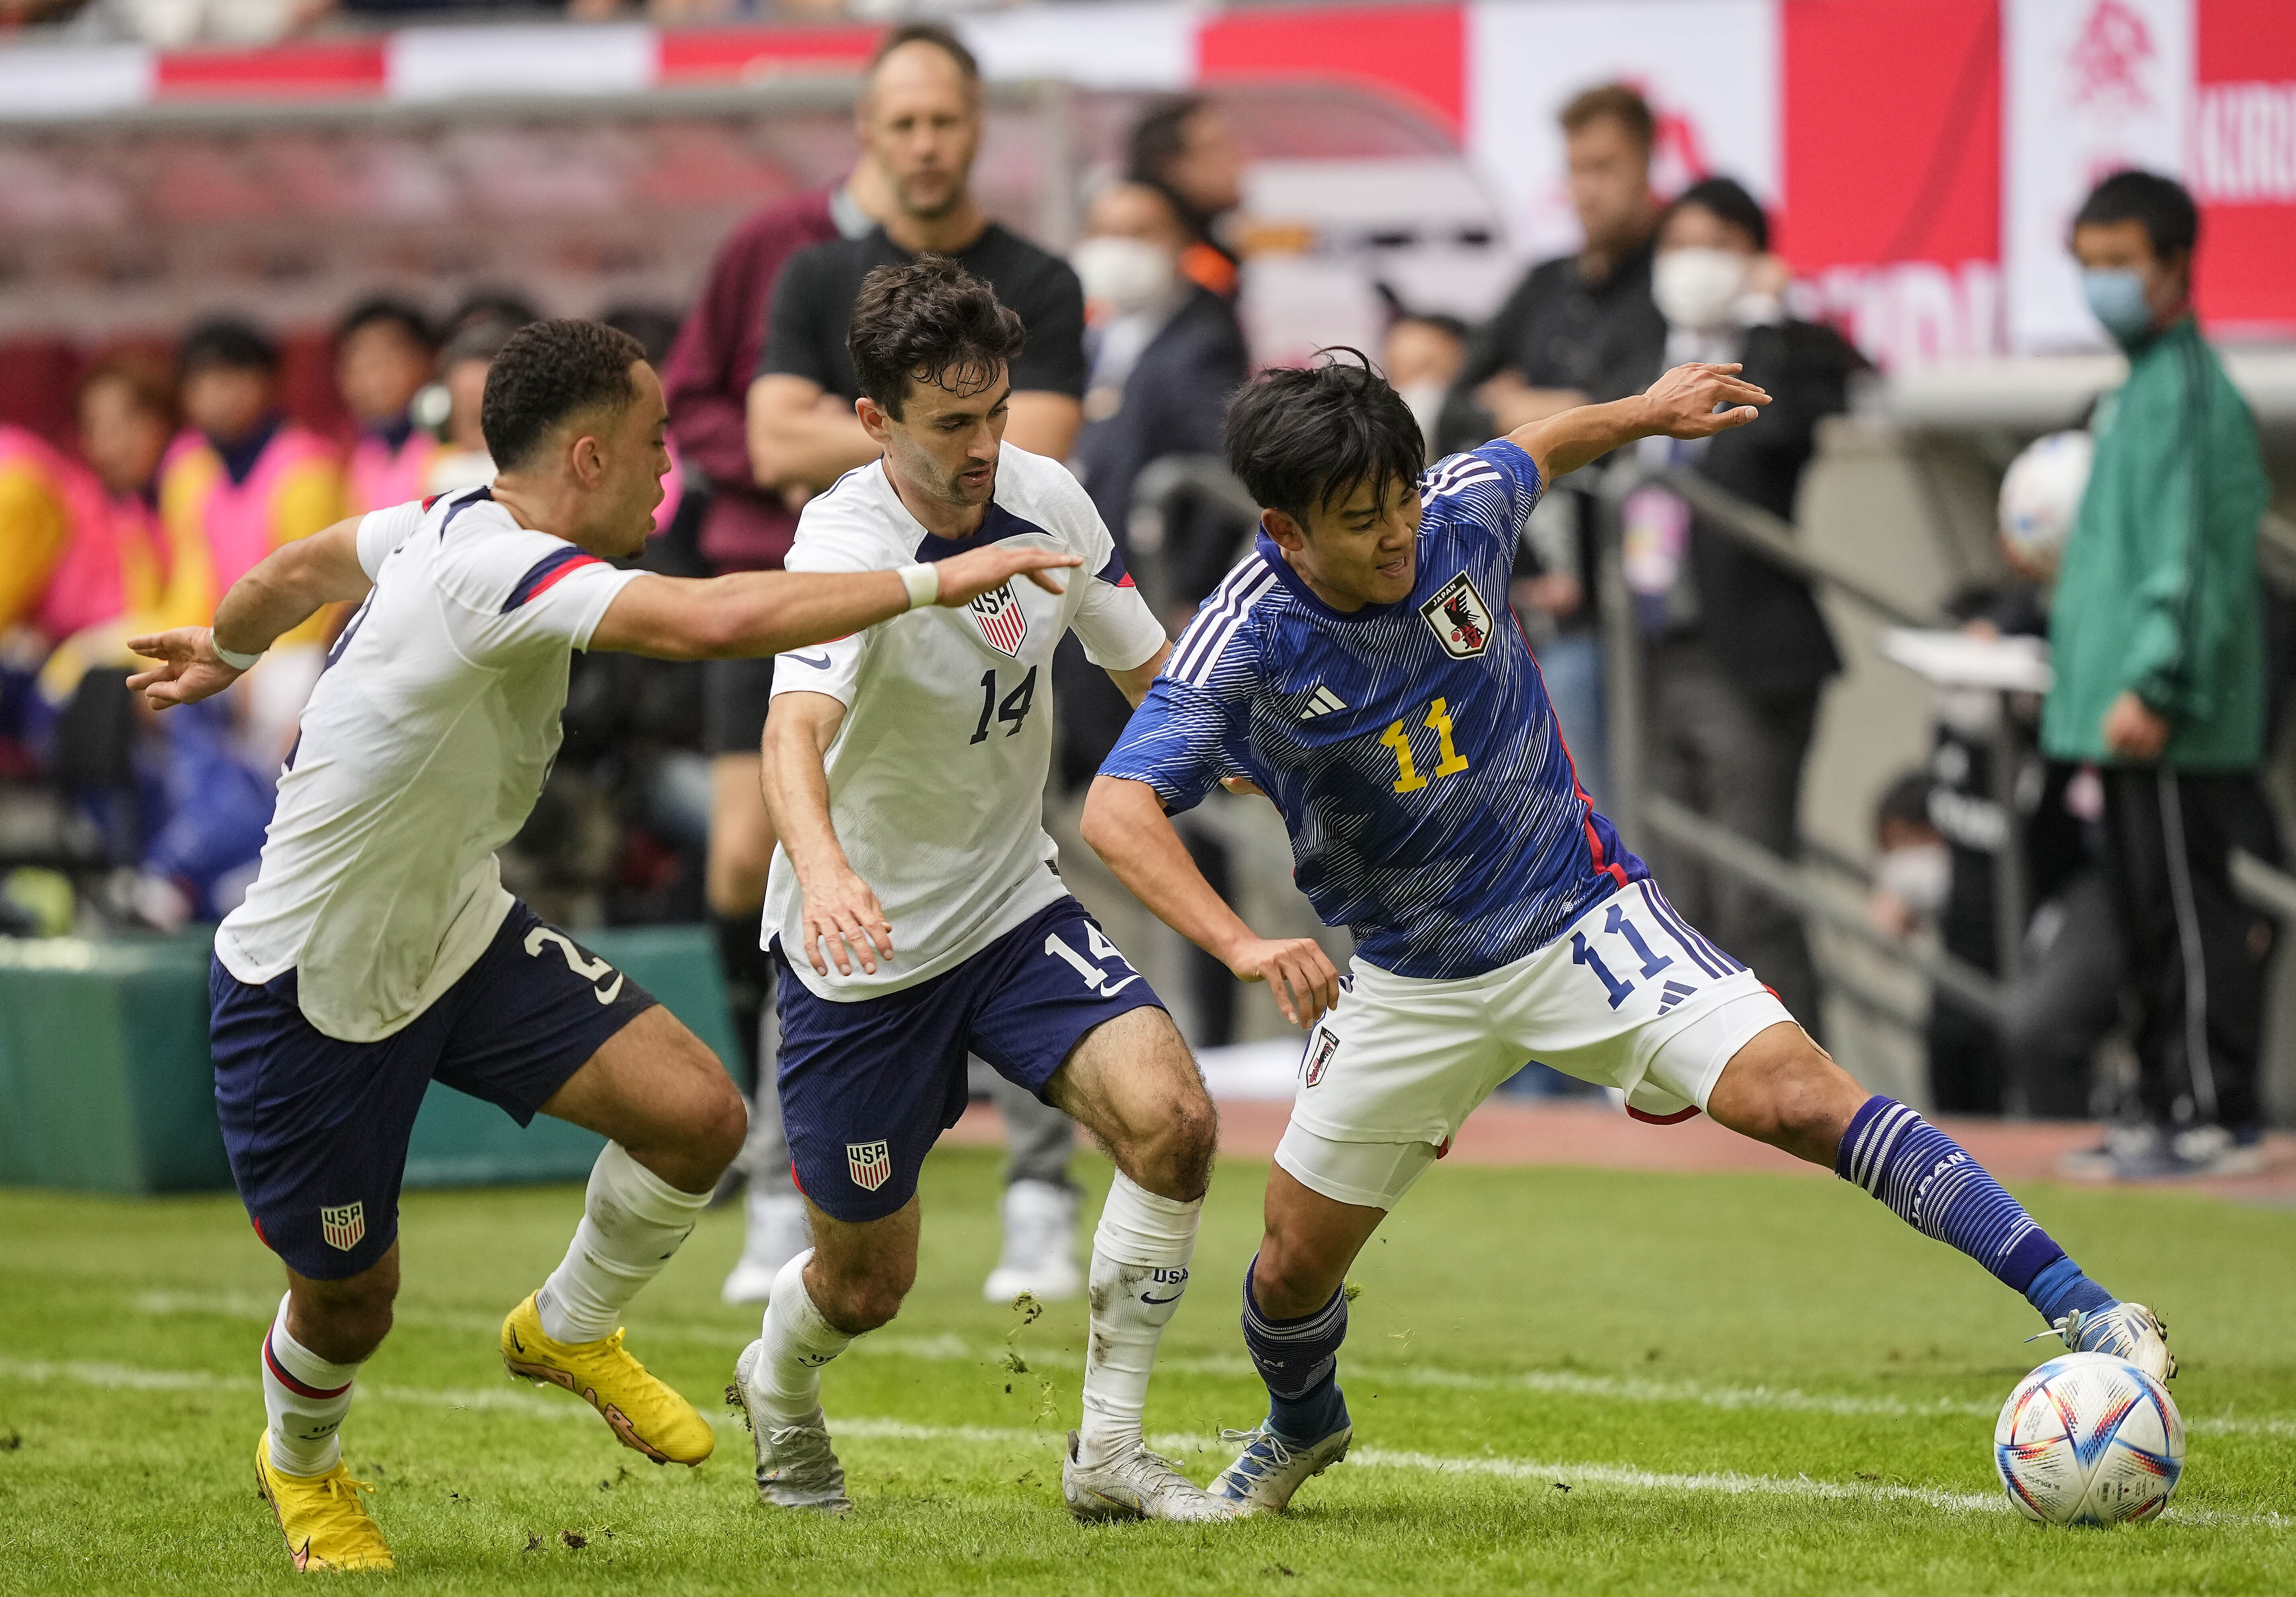 Team USA Drops Opening Game Against Japan, 1-0